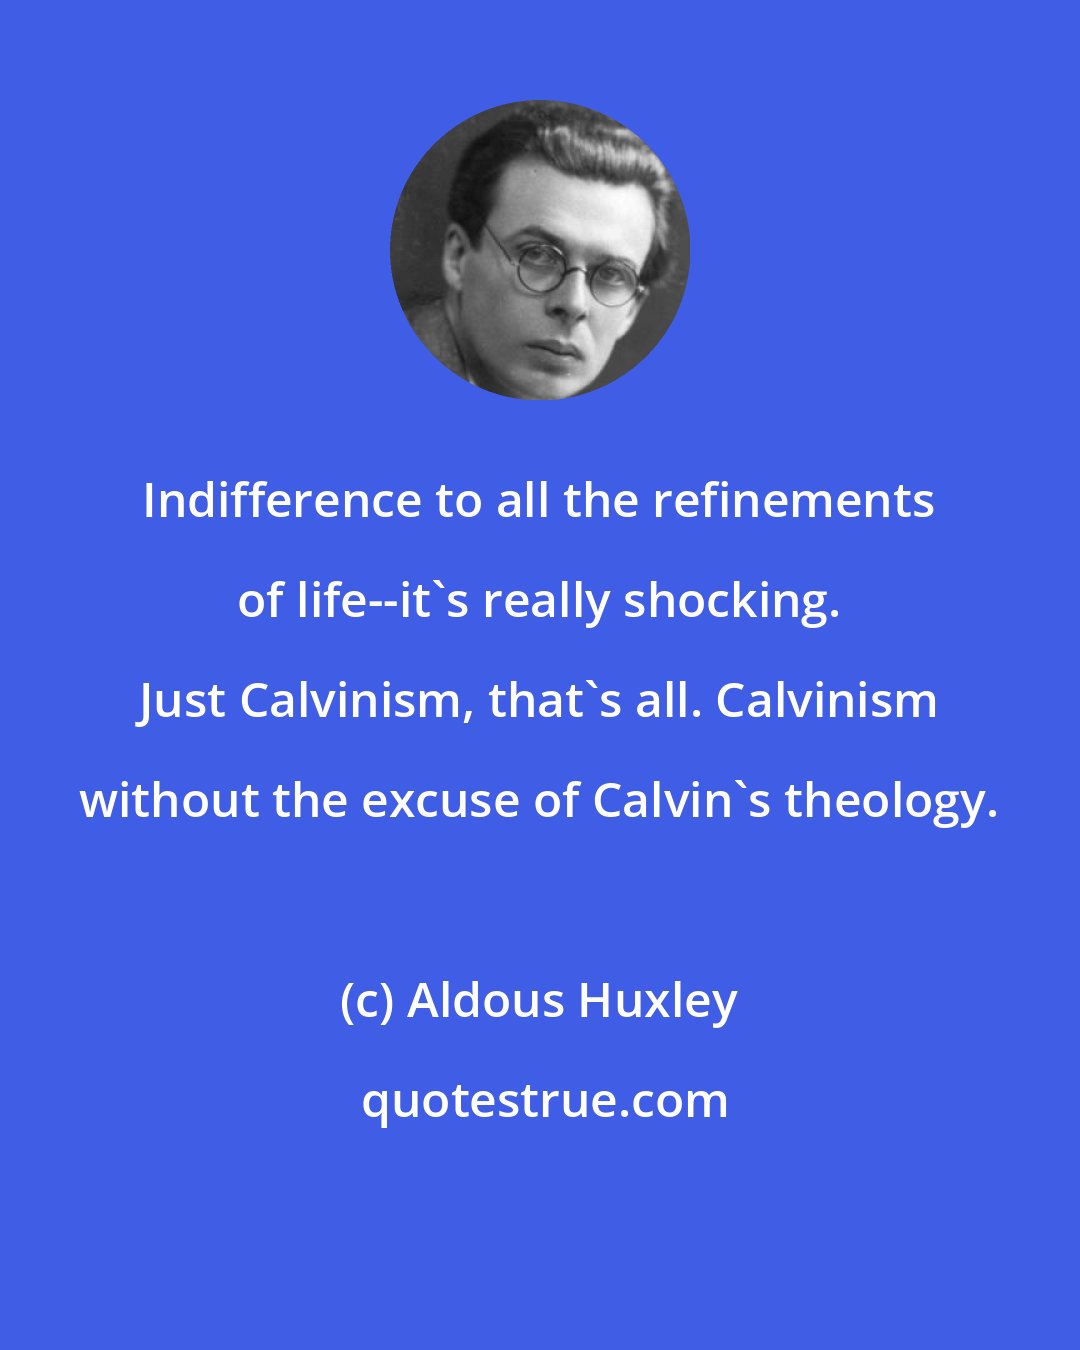 Aldous Huxley: Indifference to all the refinements of life--it's really shocking. Just Calvinism, that's all. Calvinism without the excuse of Calvin's theology.